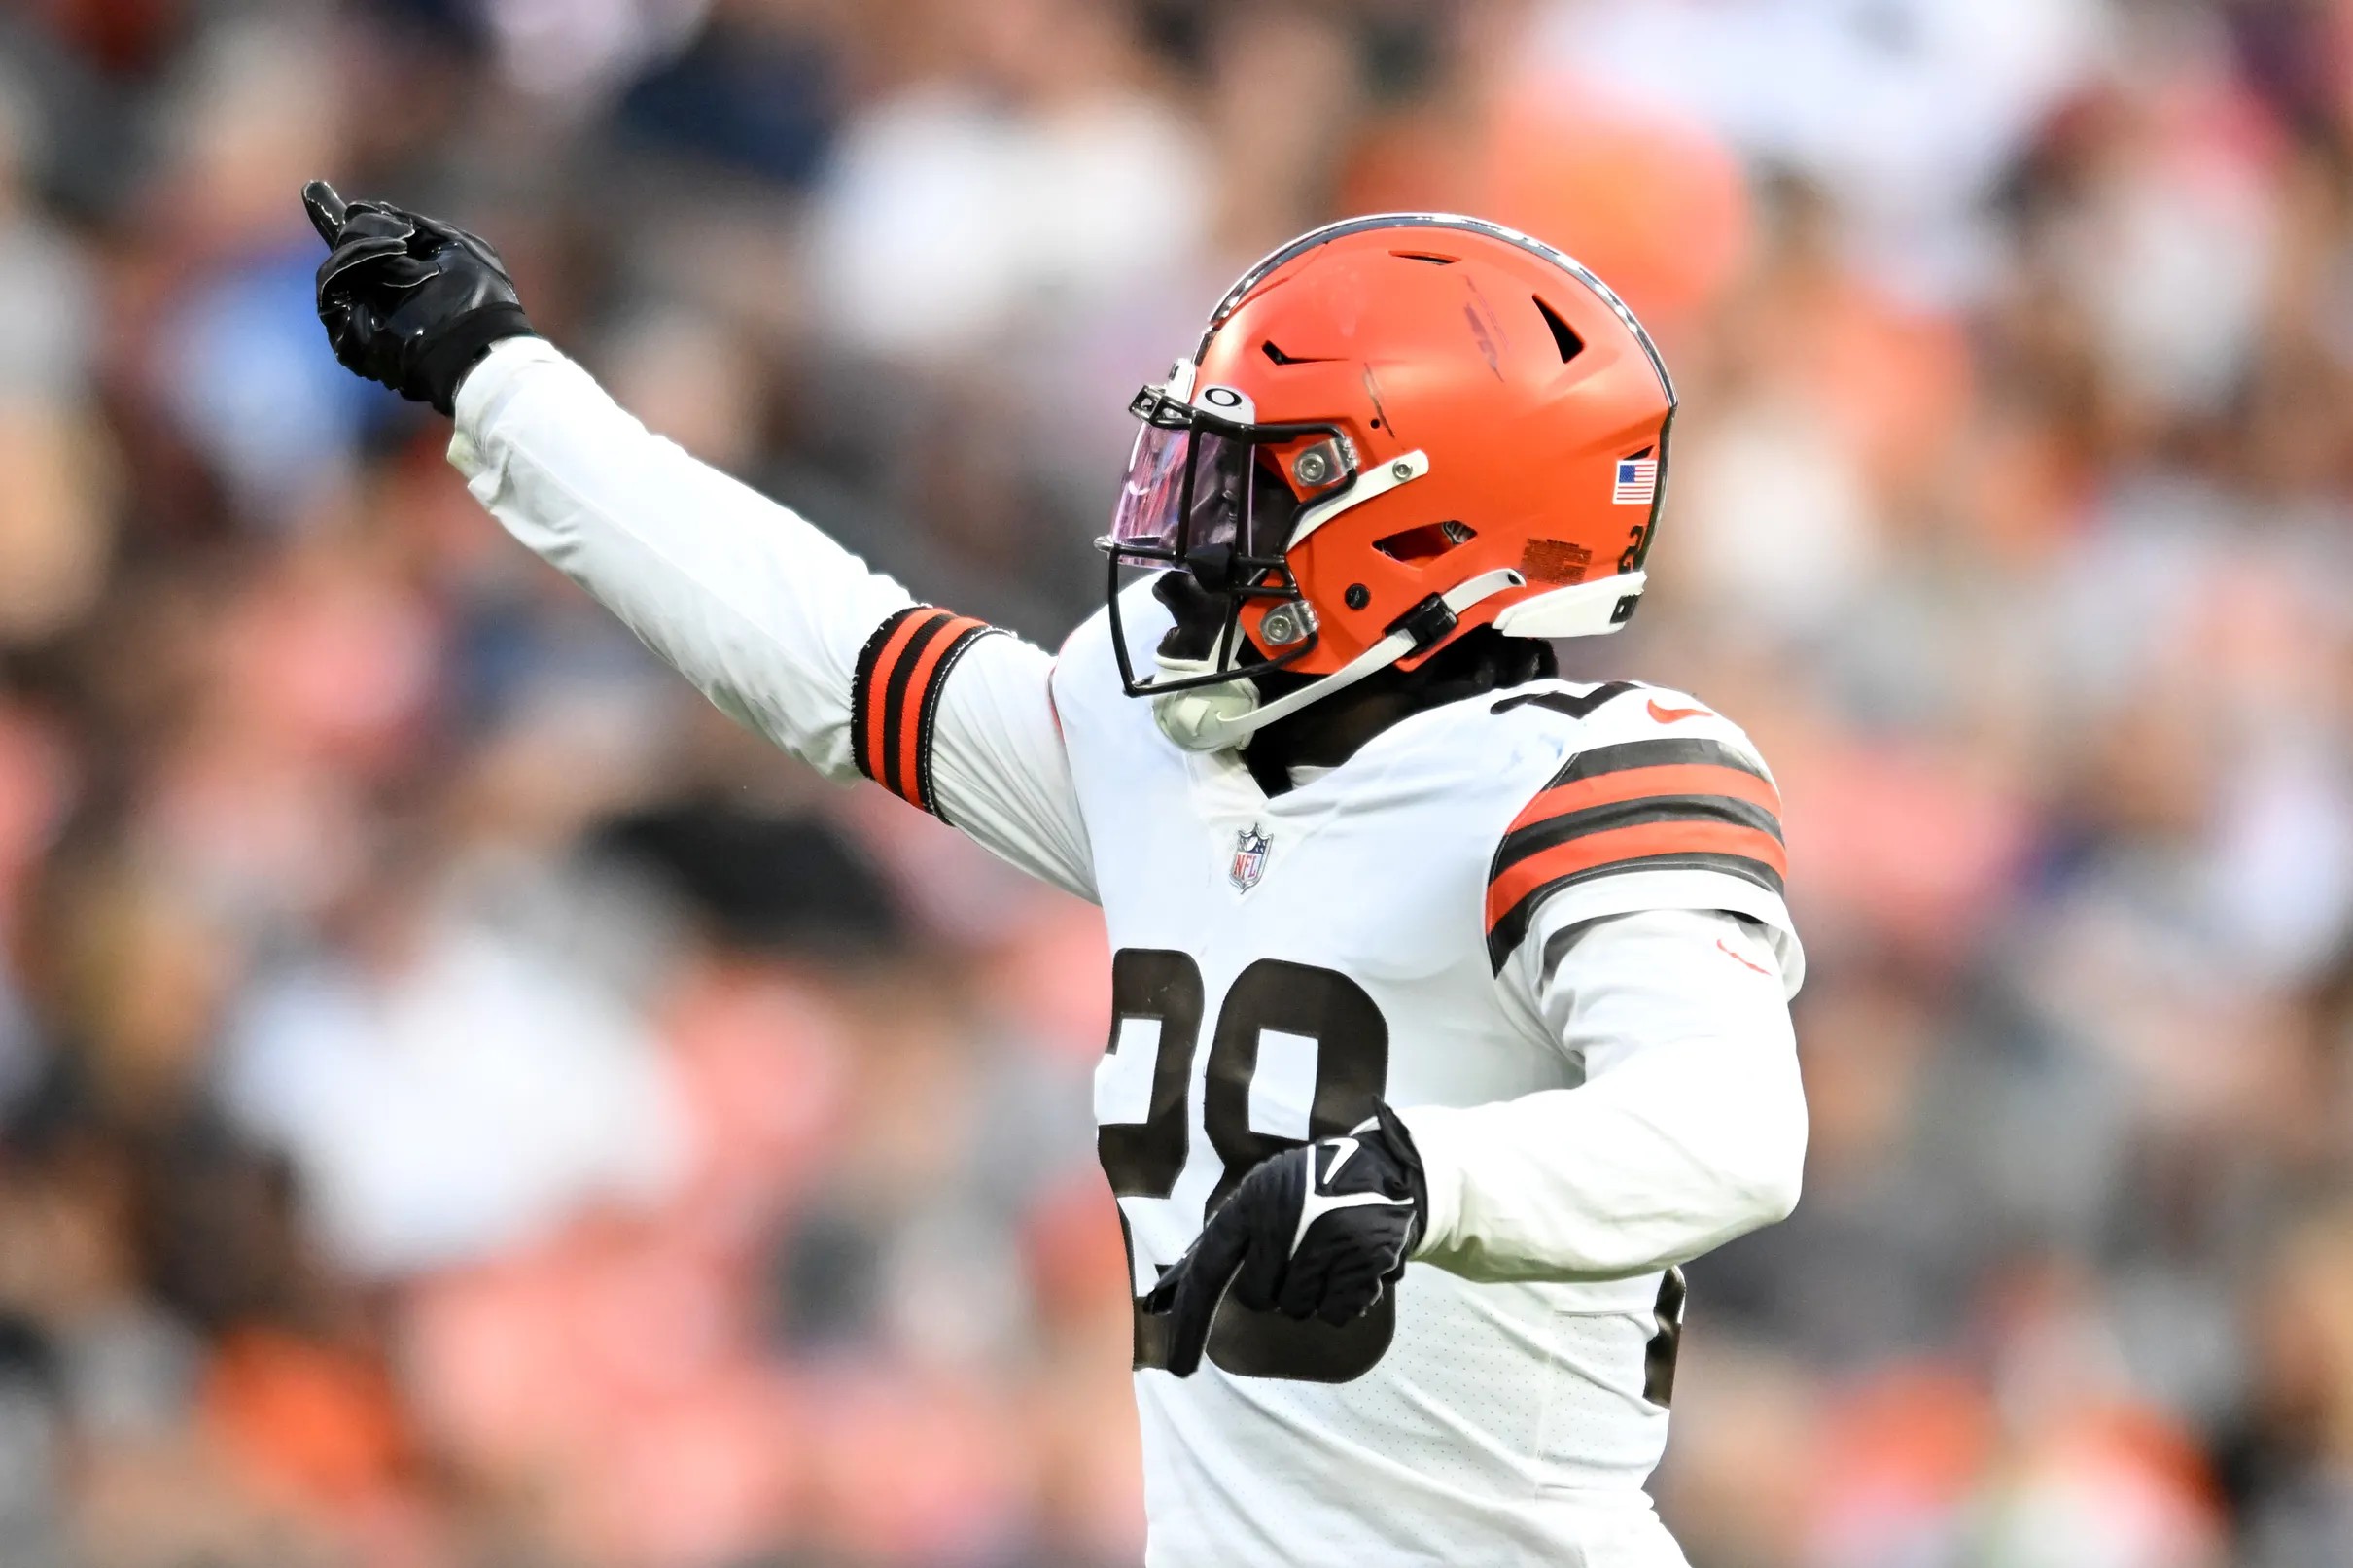 The Browns defense is counting on linebacker JOK to rebound